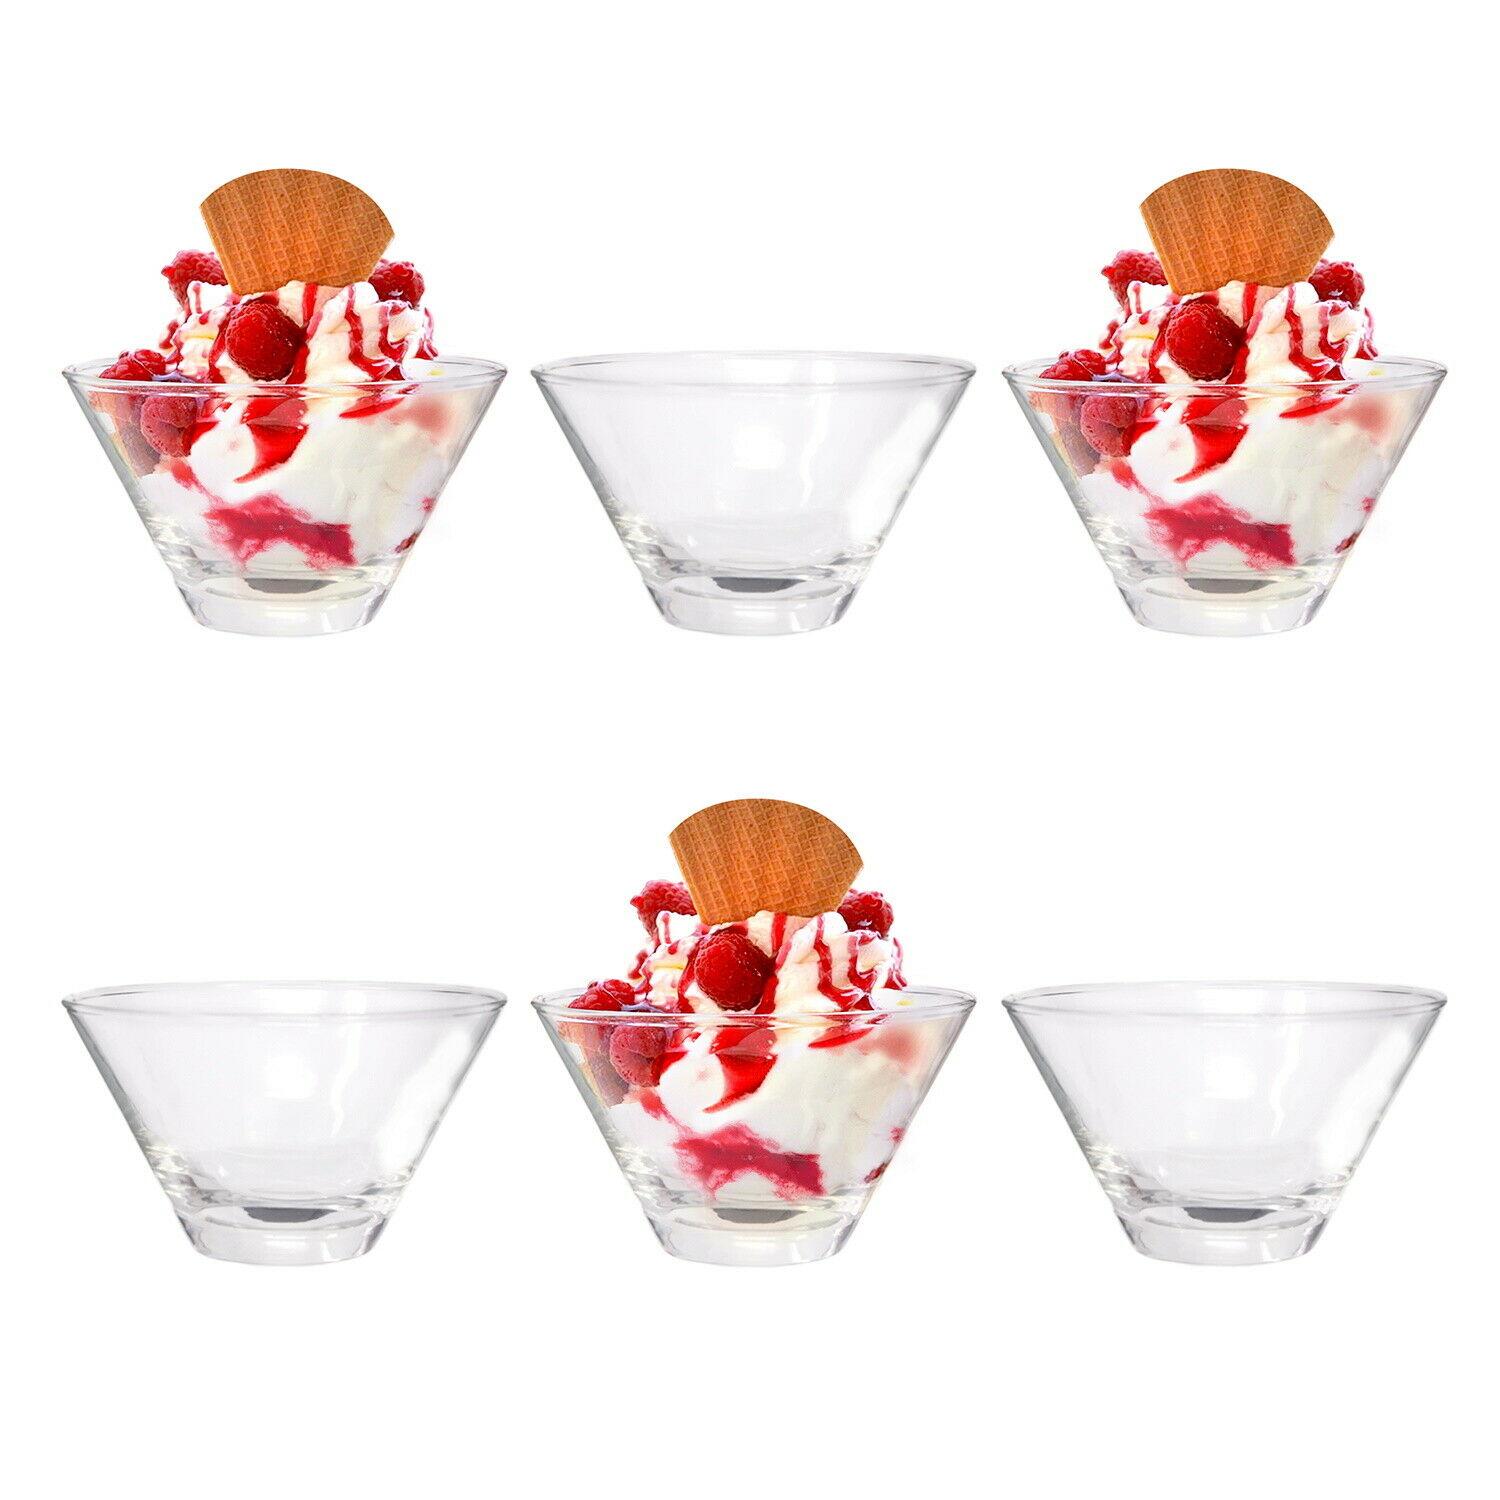 280ml 13cm x 12cm 6 x Wave Style Glass Ice Cream Dishes Great Bowls for Sorbets and Sundaes 